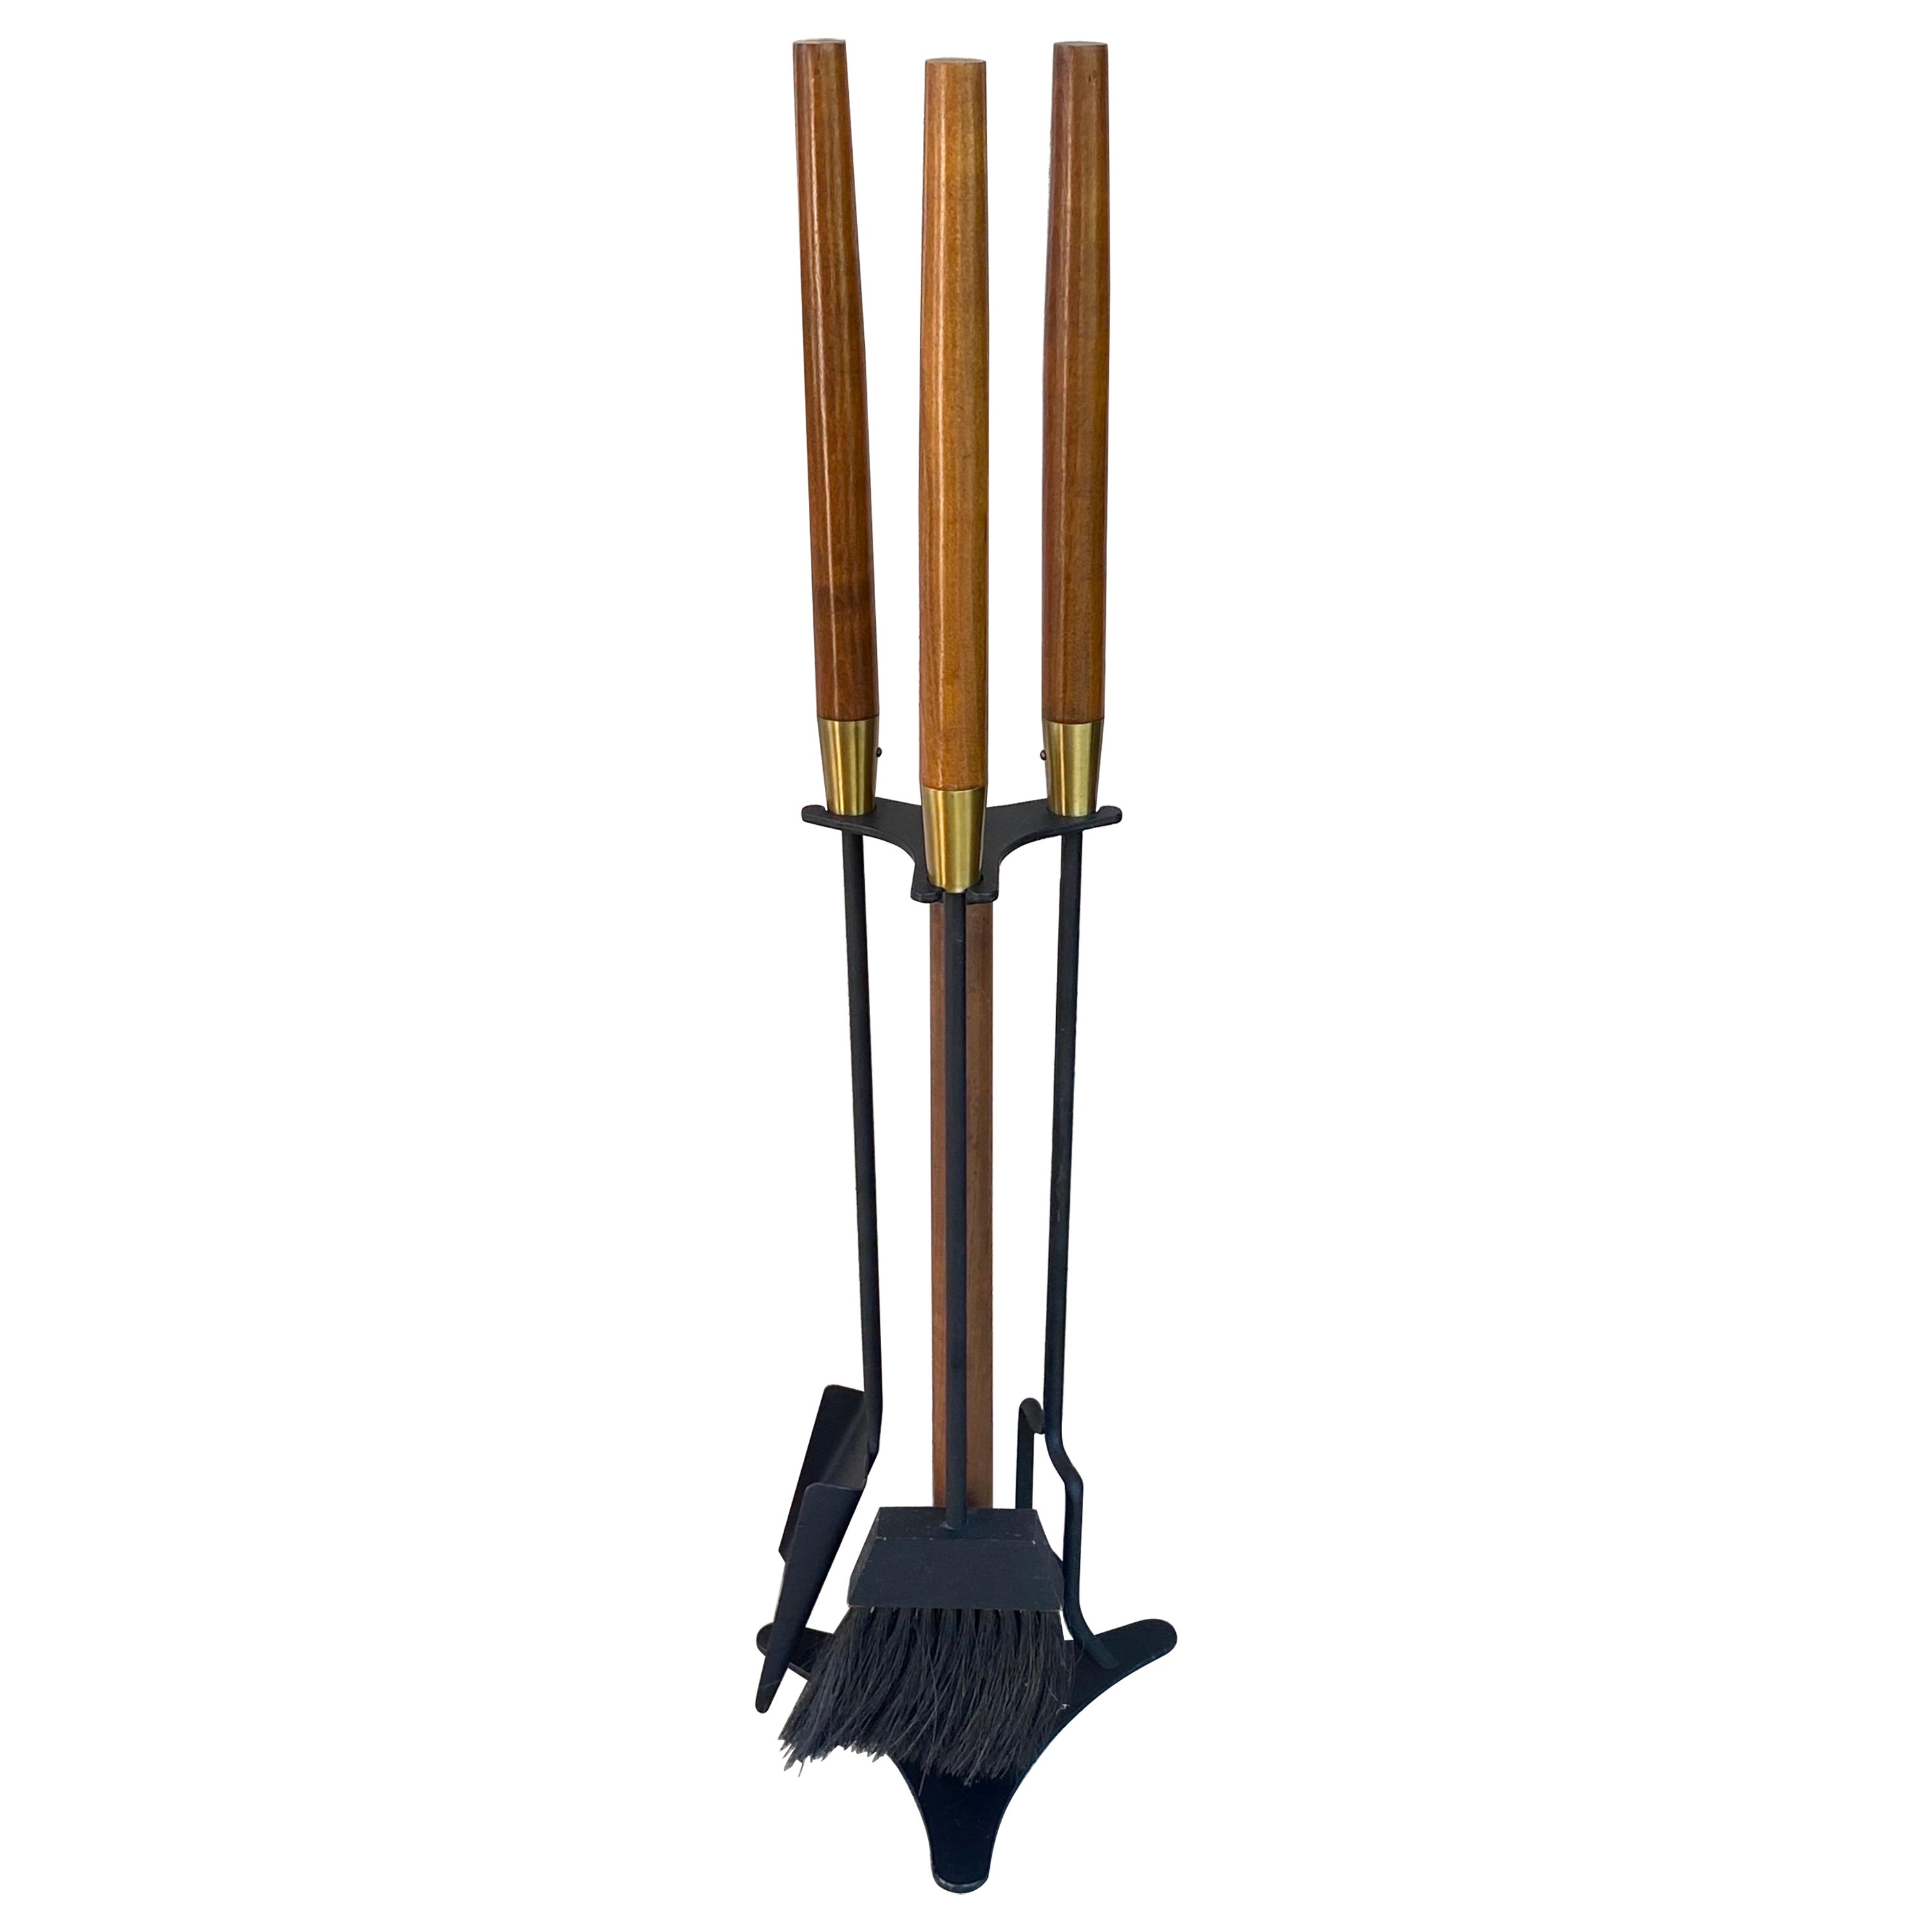 Modern set of Fireplace Tools with Wood Handles